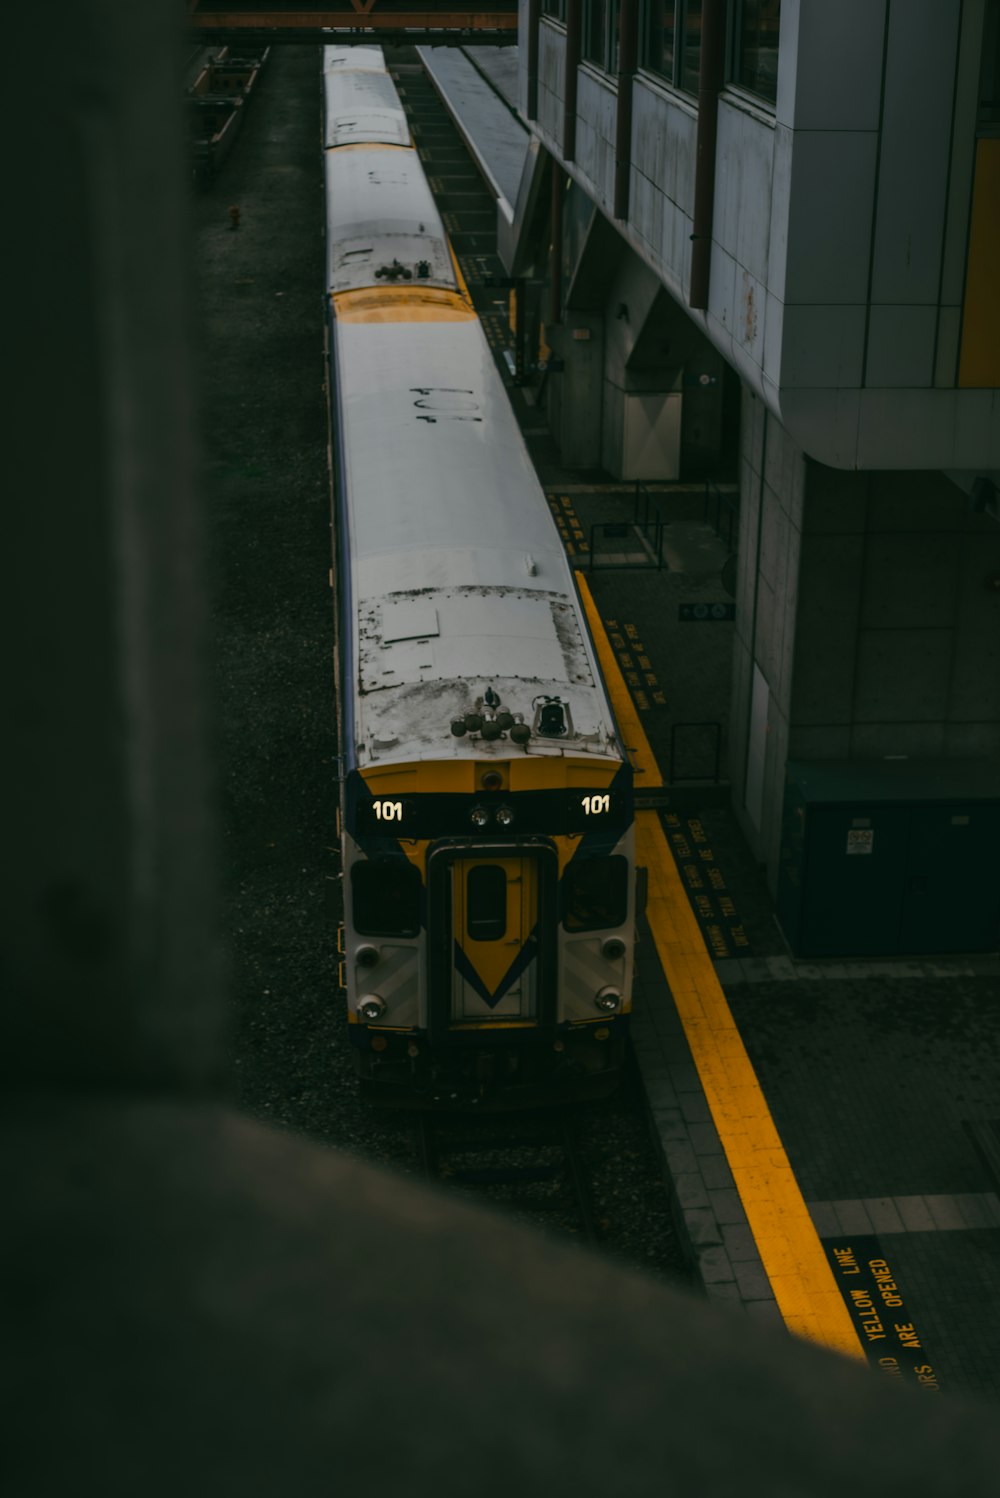 a yellow and white train parked at a train station